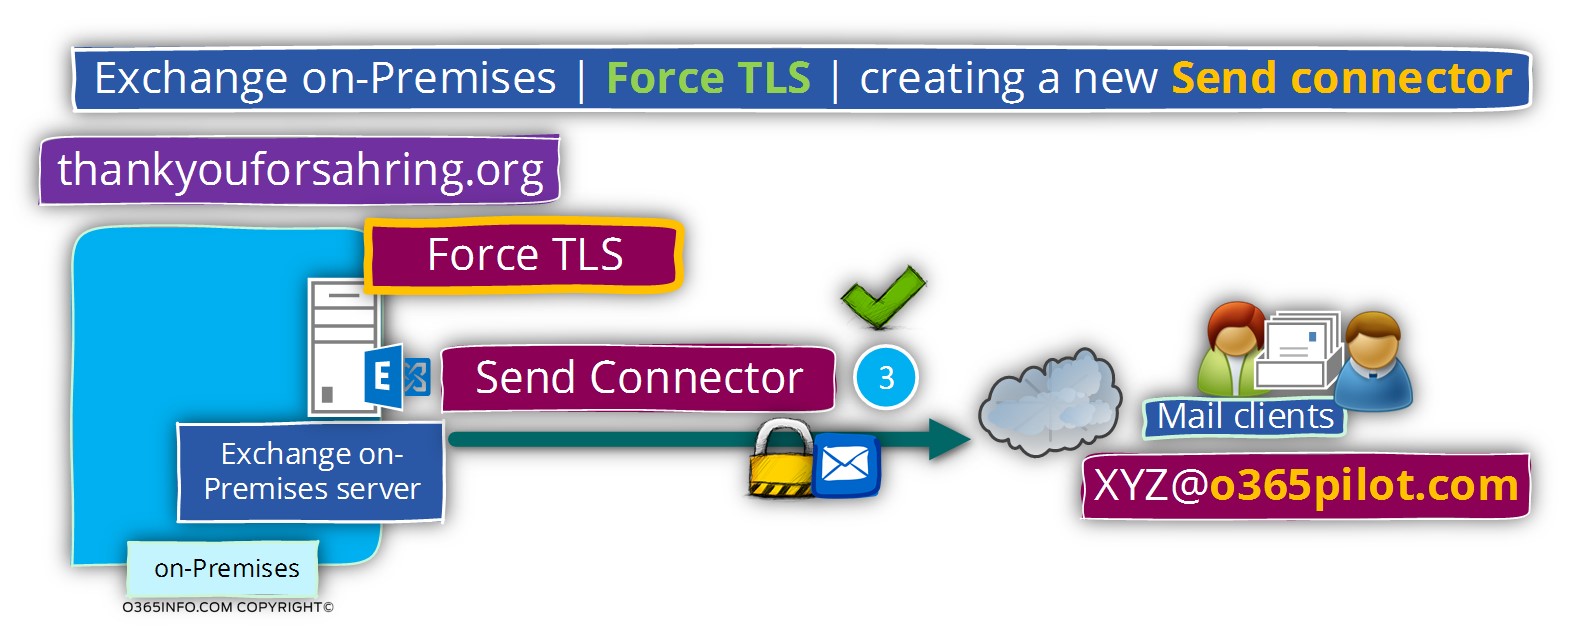 Exchange on-Premises - Force TLS - creating a new Send connector